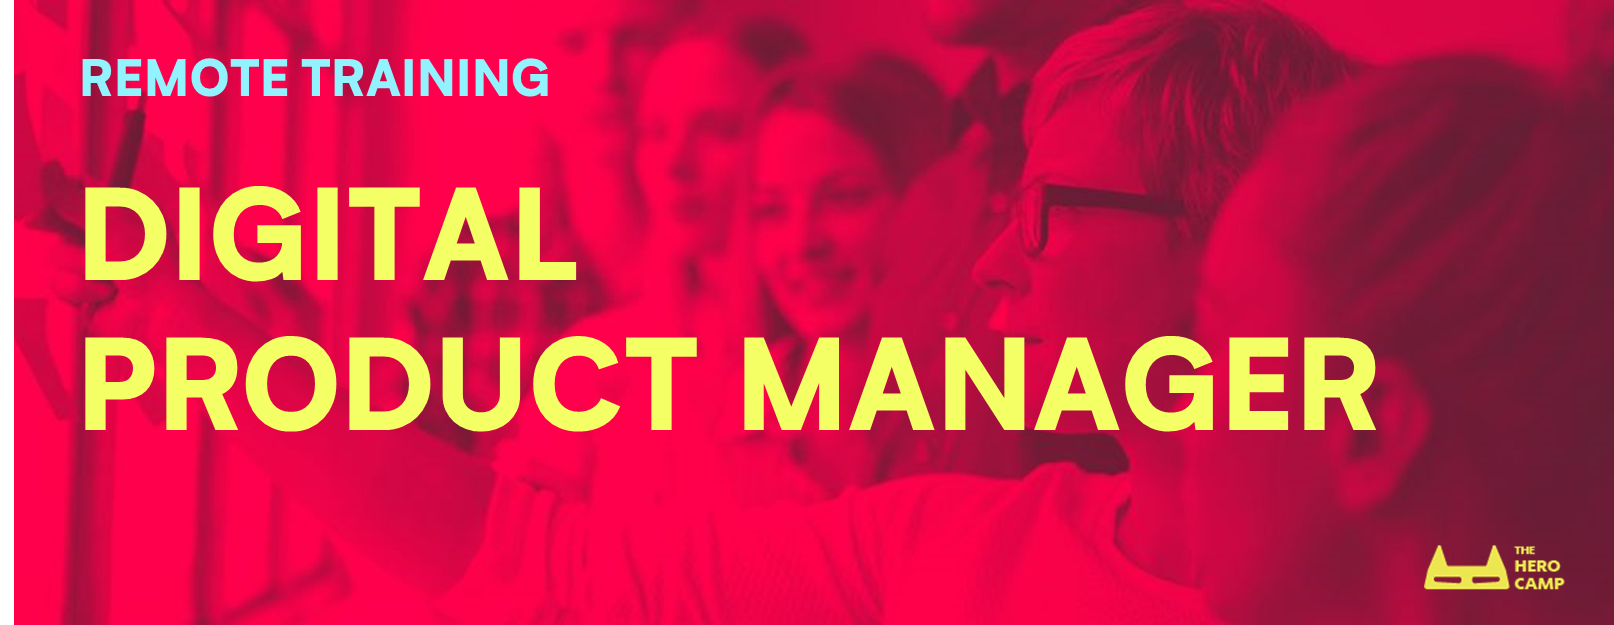 Digital product manager Remote